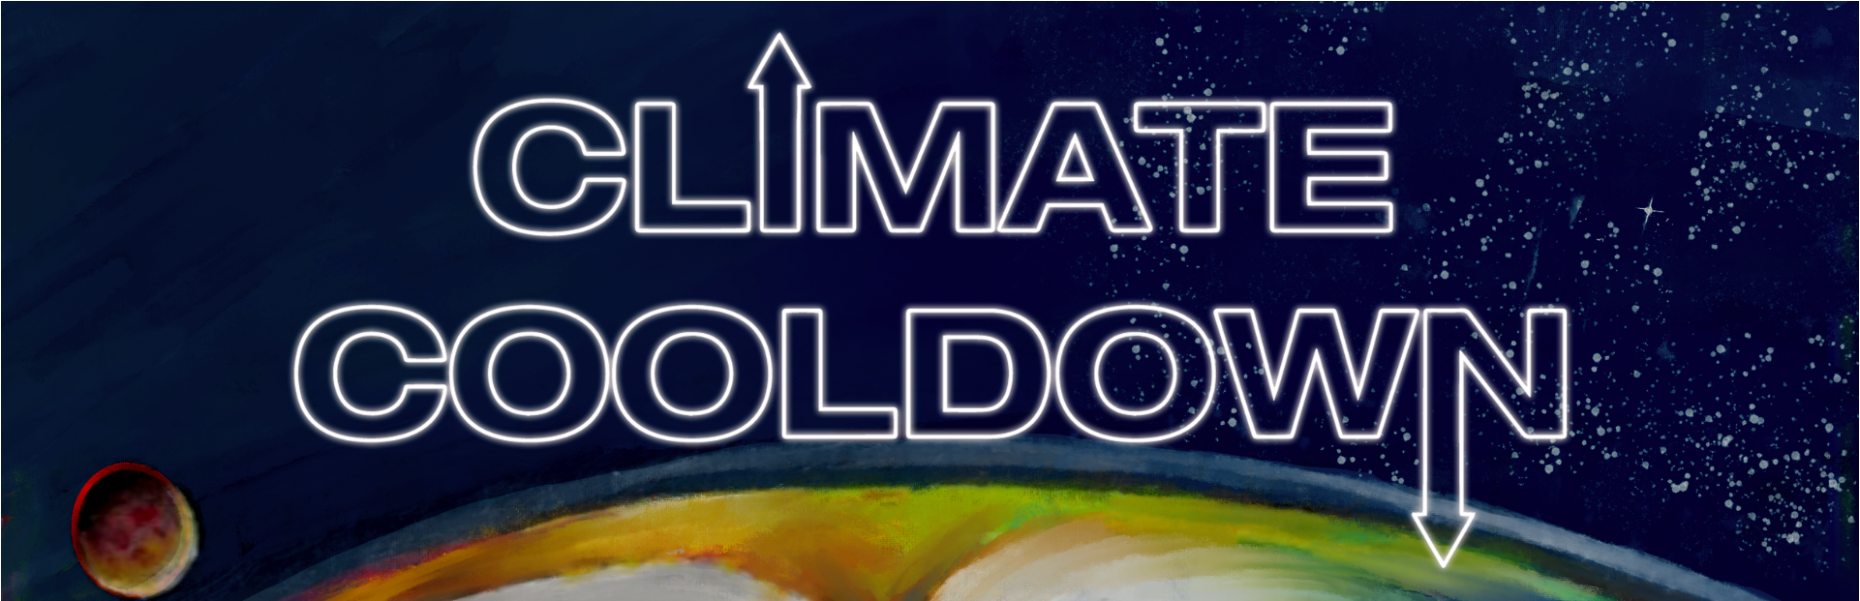 Climate Cooldown the Game Main Banner